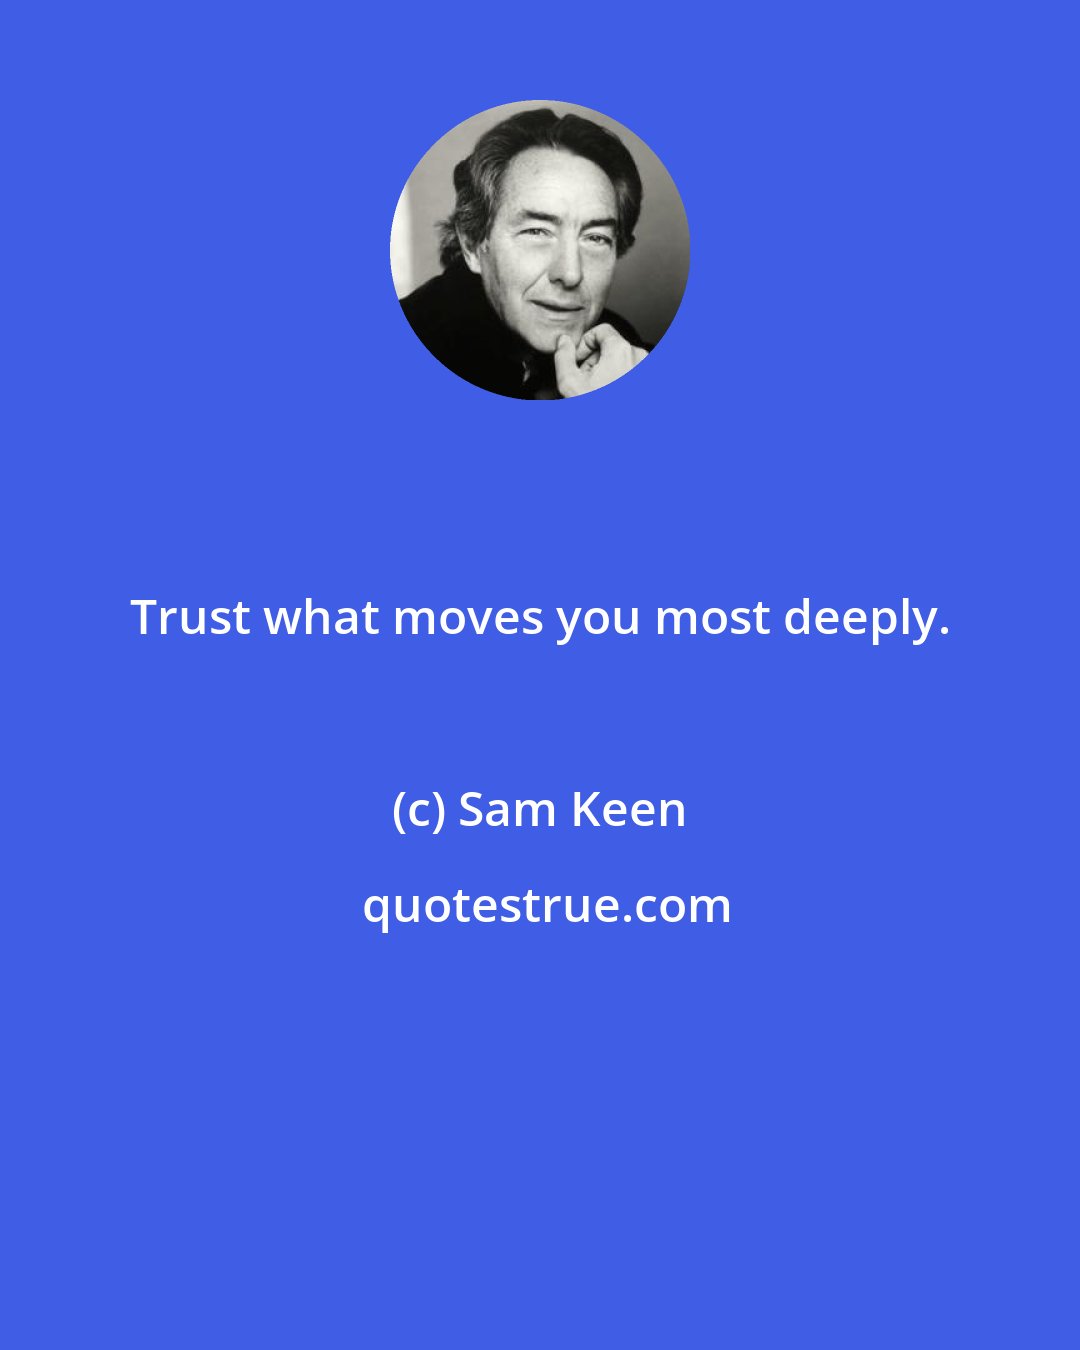 Sam Keen: Trust what moves you most deeply.